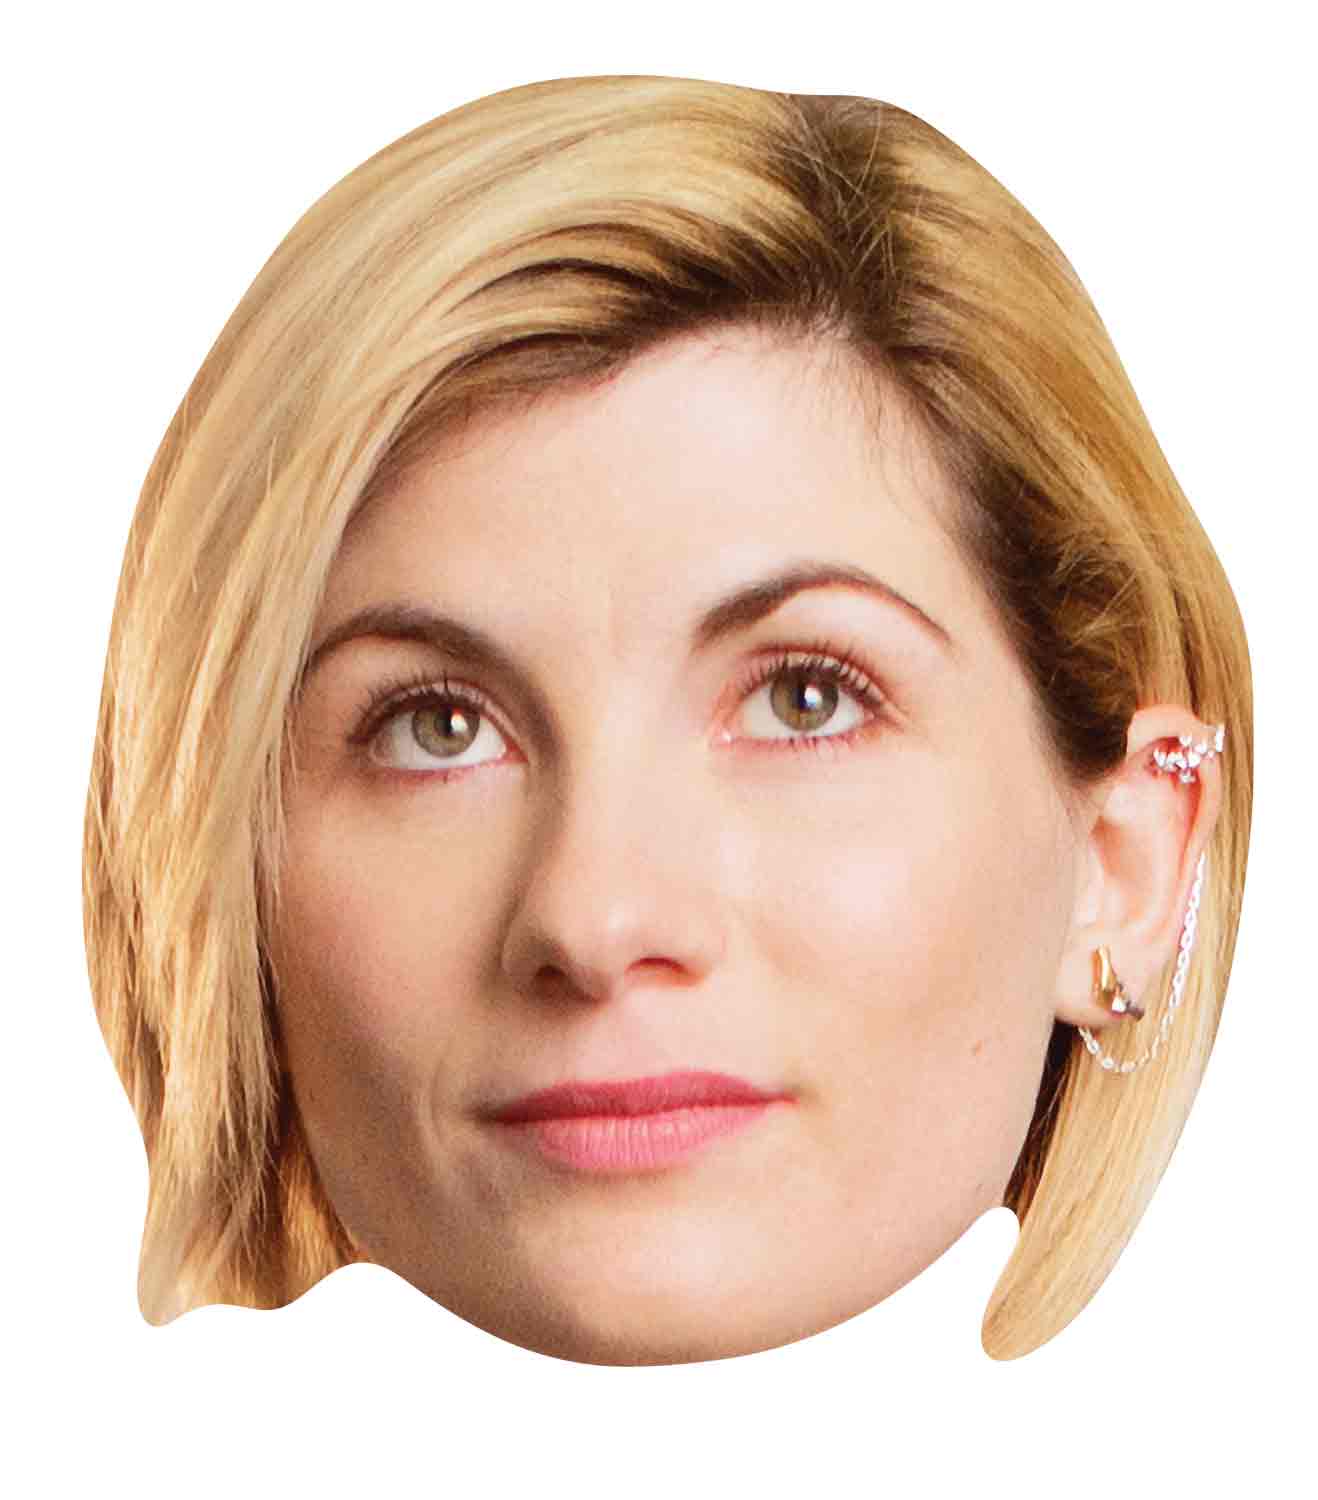 SM292 Jodie Whittaker 13th Doctor Doctor Who Doctor Who Single Face Mask